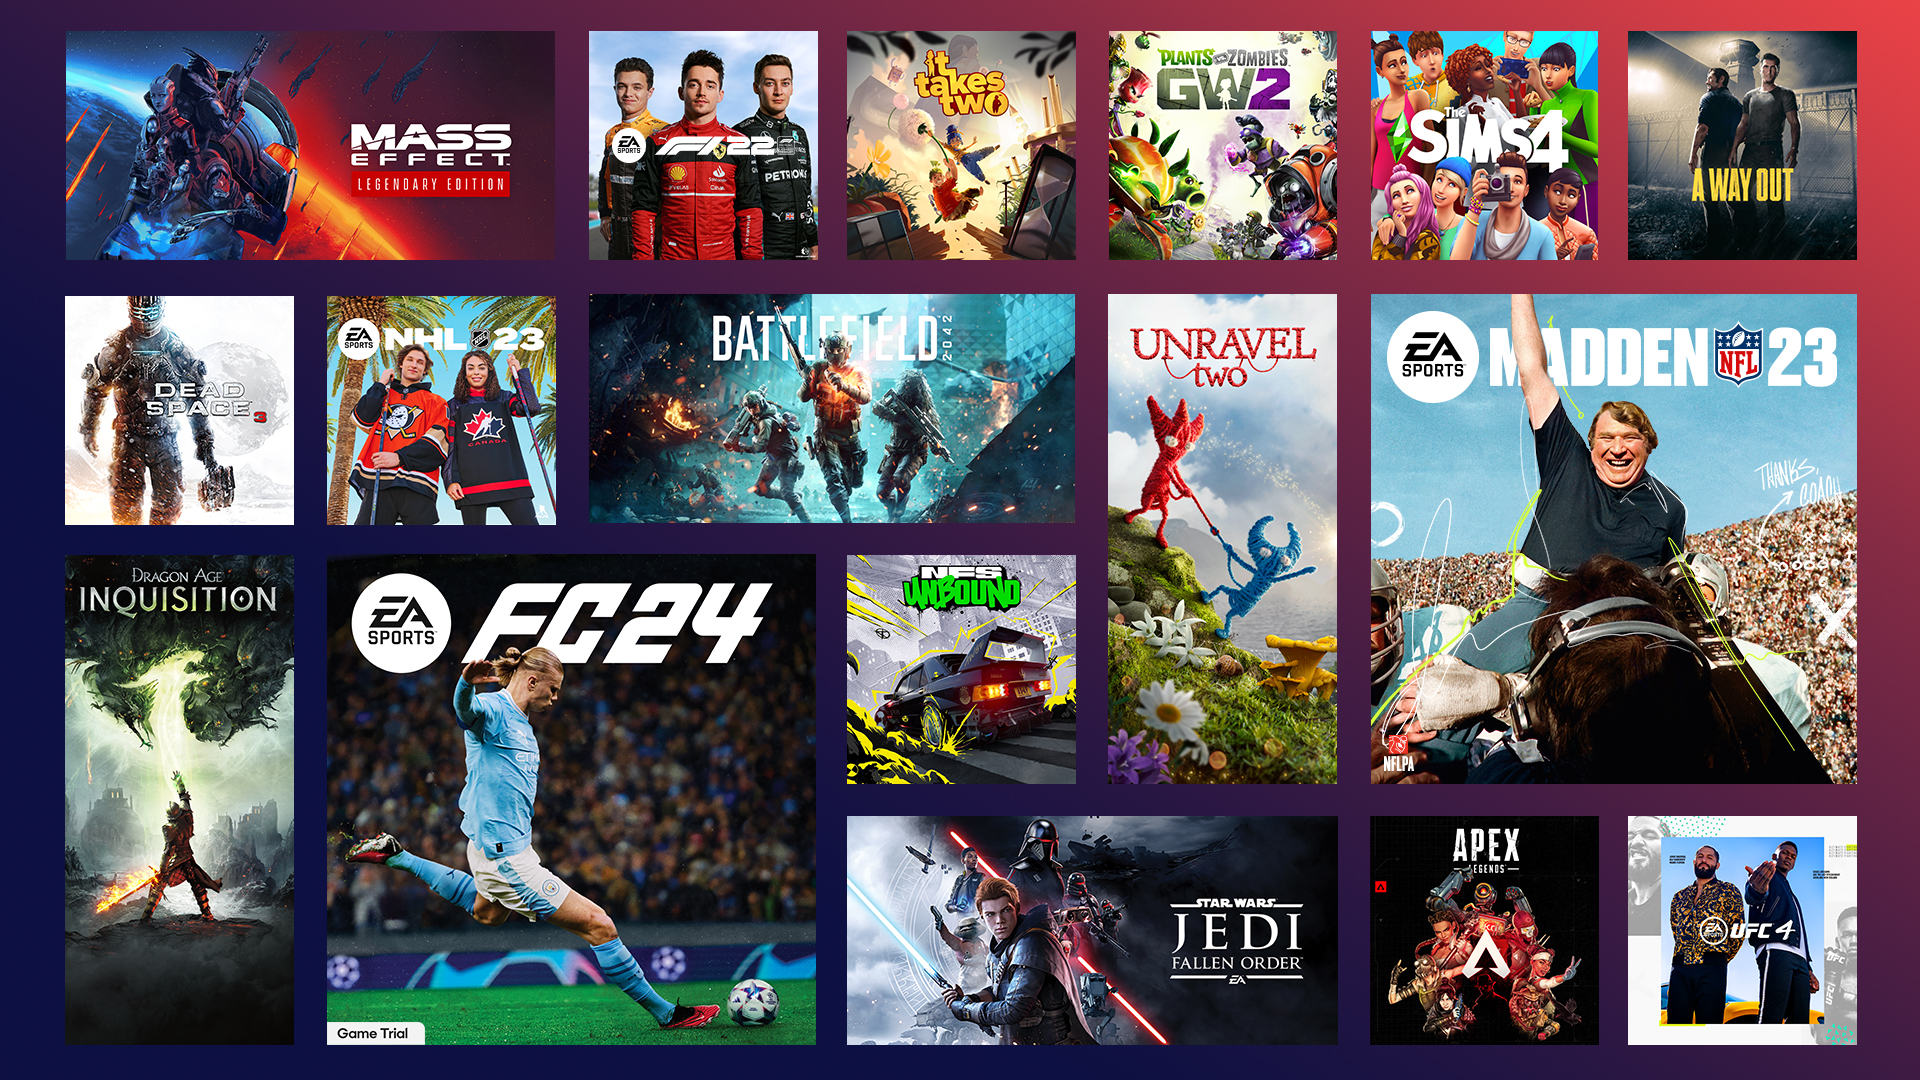 what is ea access xbox one